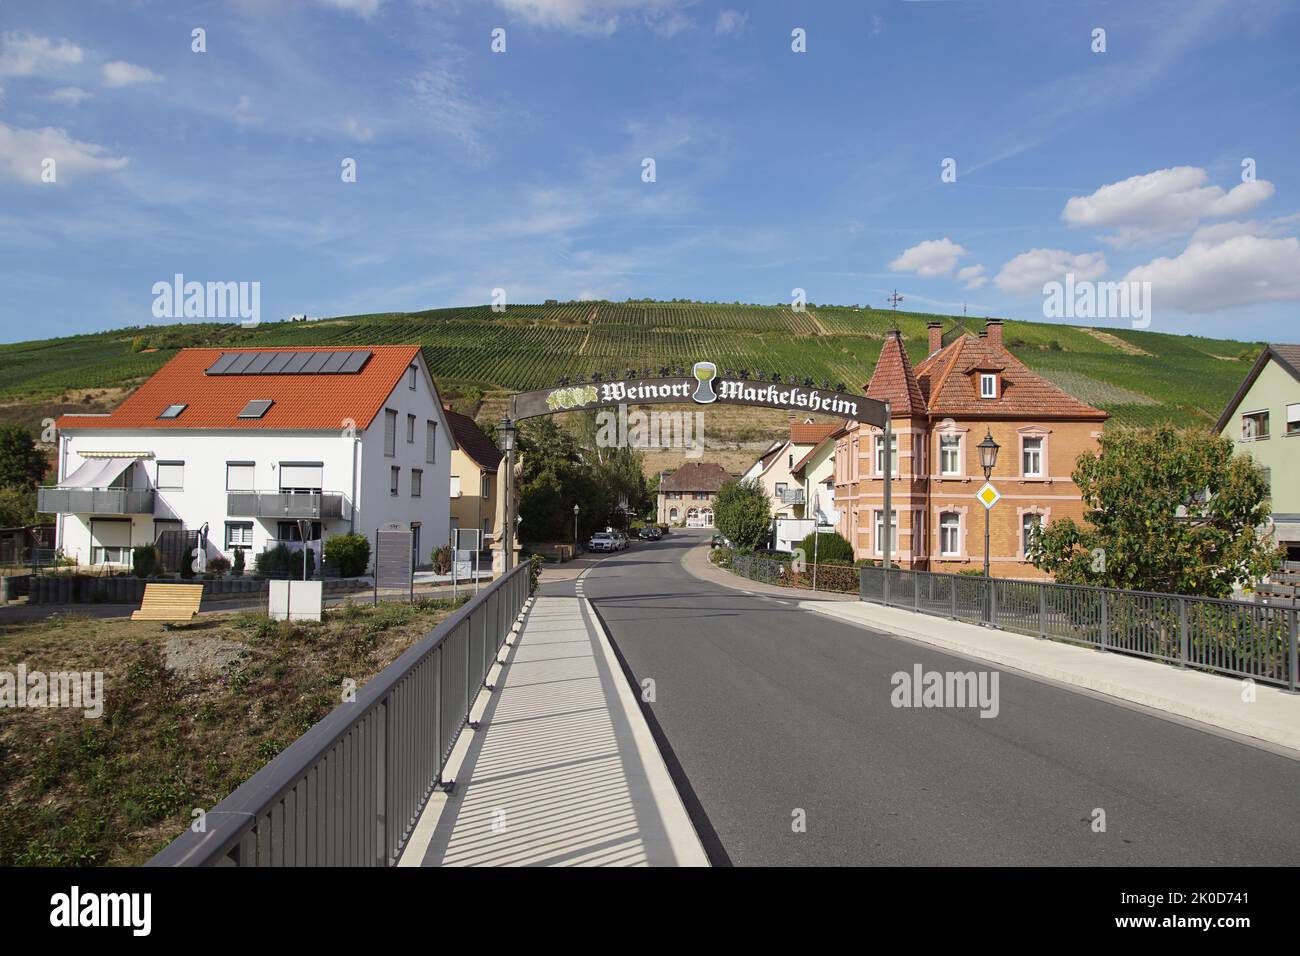 On the bridge over the river Tauber to the vineyards on the hills. Markelsheim, a district of Bad Mergentheim in the Main-Tauber district. Germany, Stock Photo